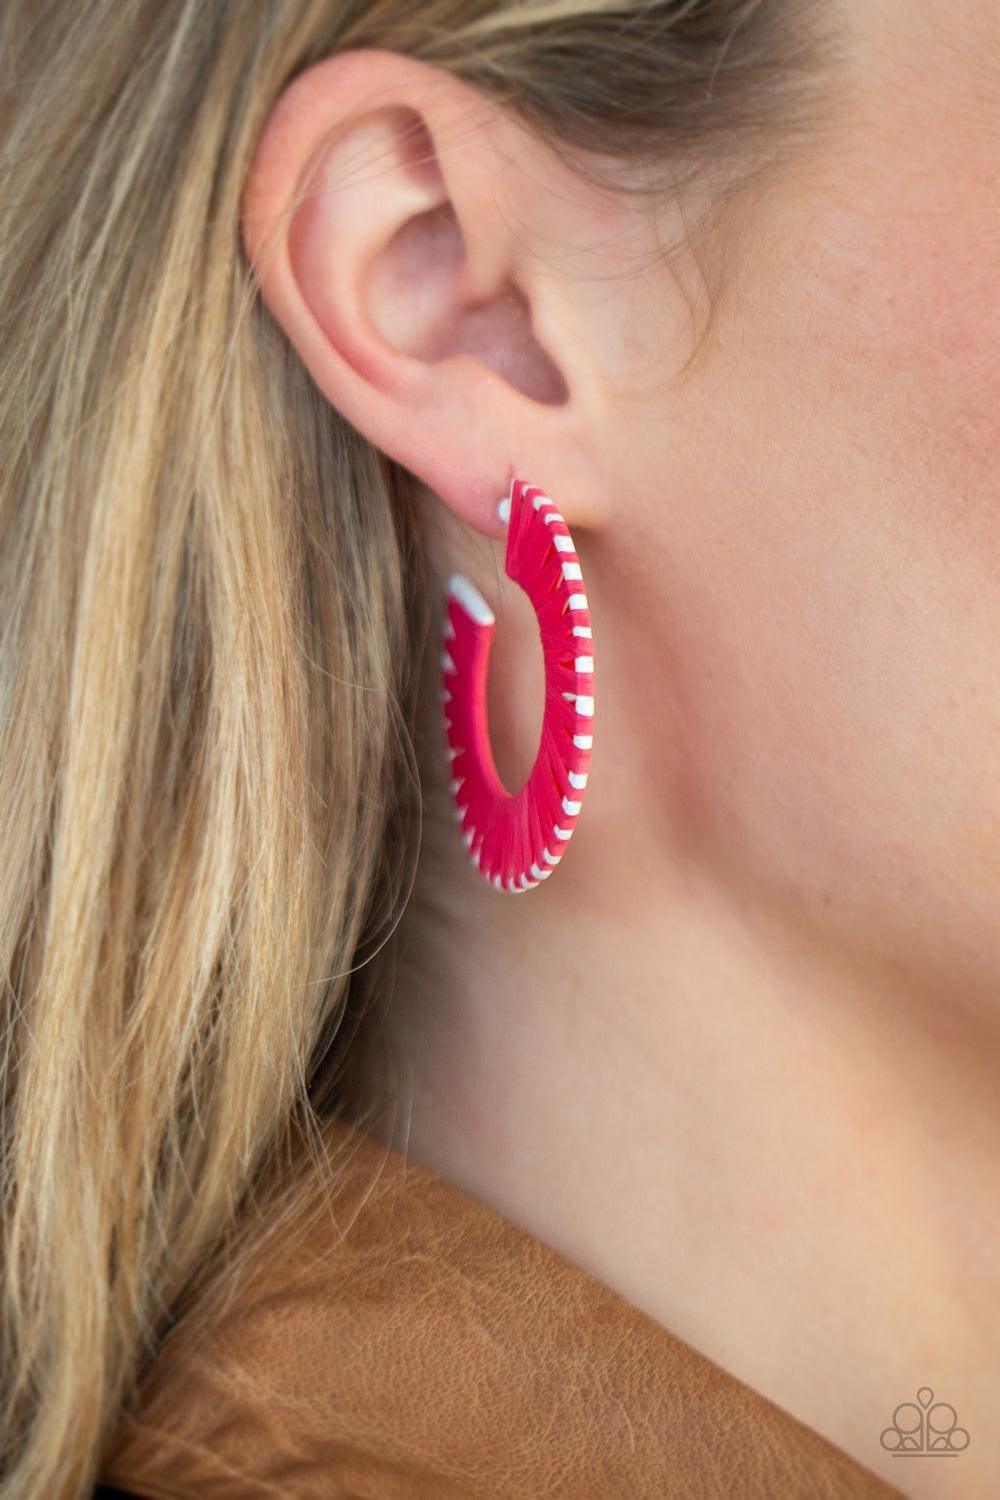 Paparazzi Accessories - Everybody Conga! - Pink Hoops Earrings - Bling by JessieK